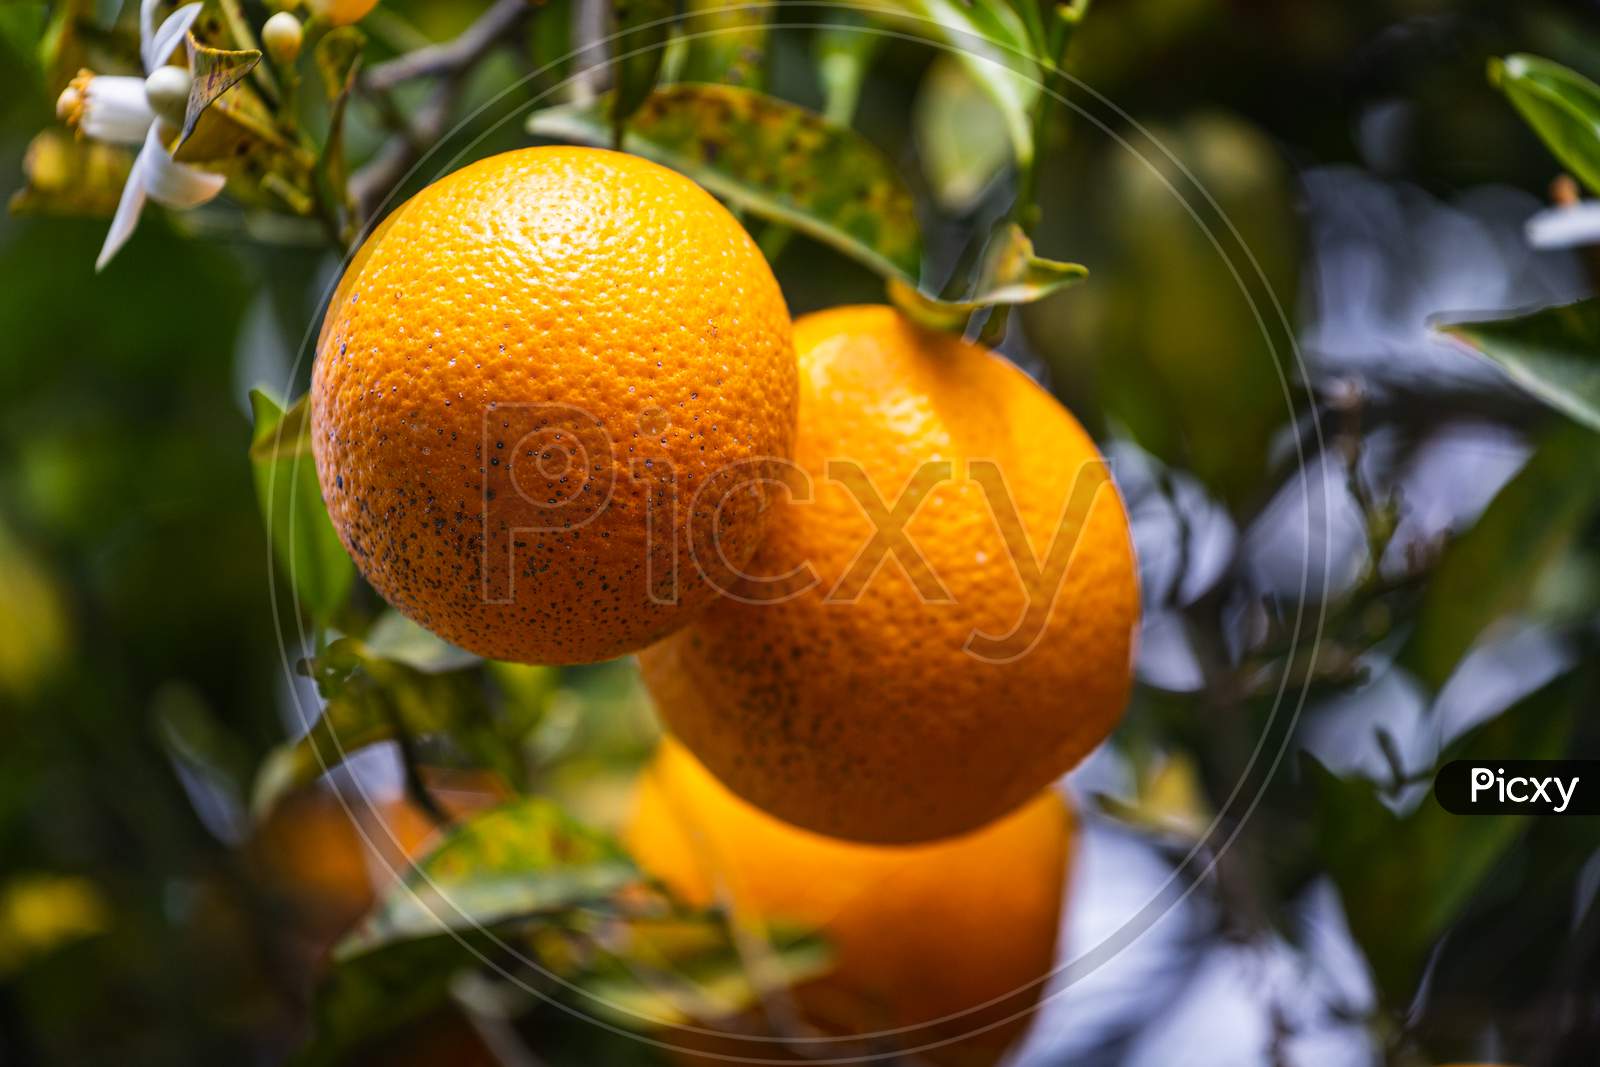 Close-Up Beautiful Orange Tree With Orange Large Round Oranges Surrounded By Many Bright Green Leaves, Soft Focus